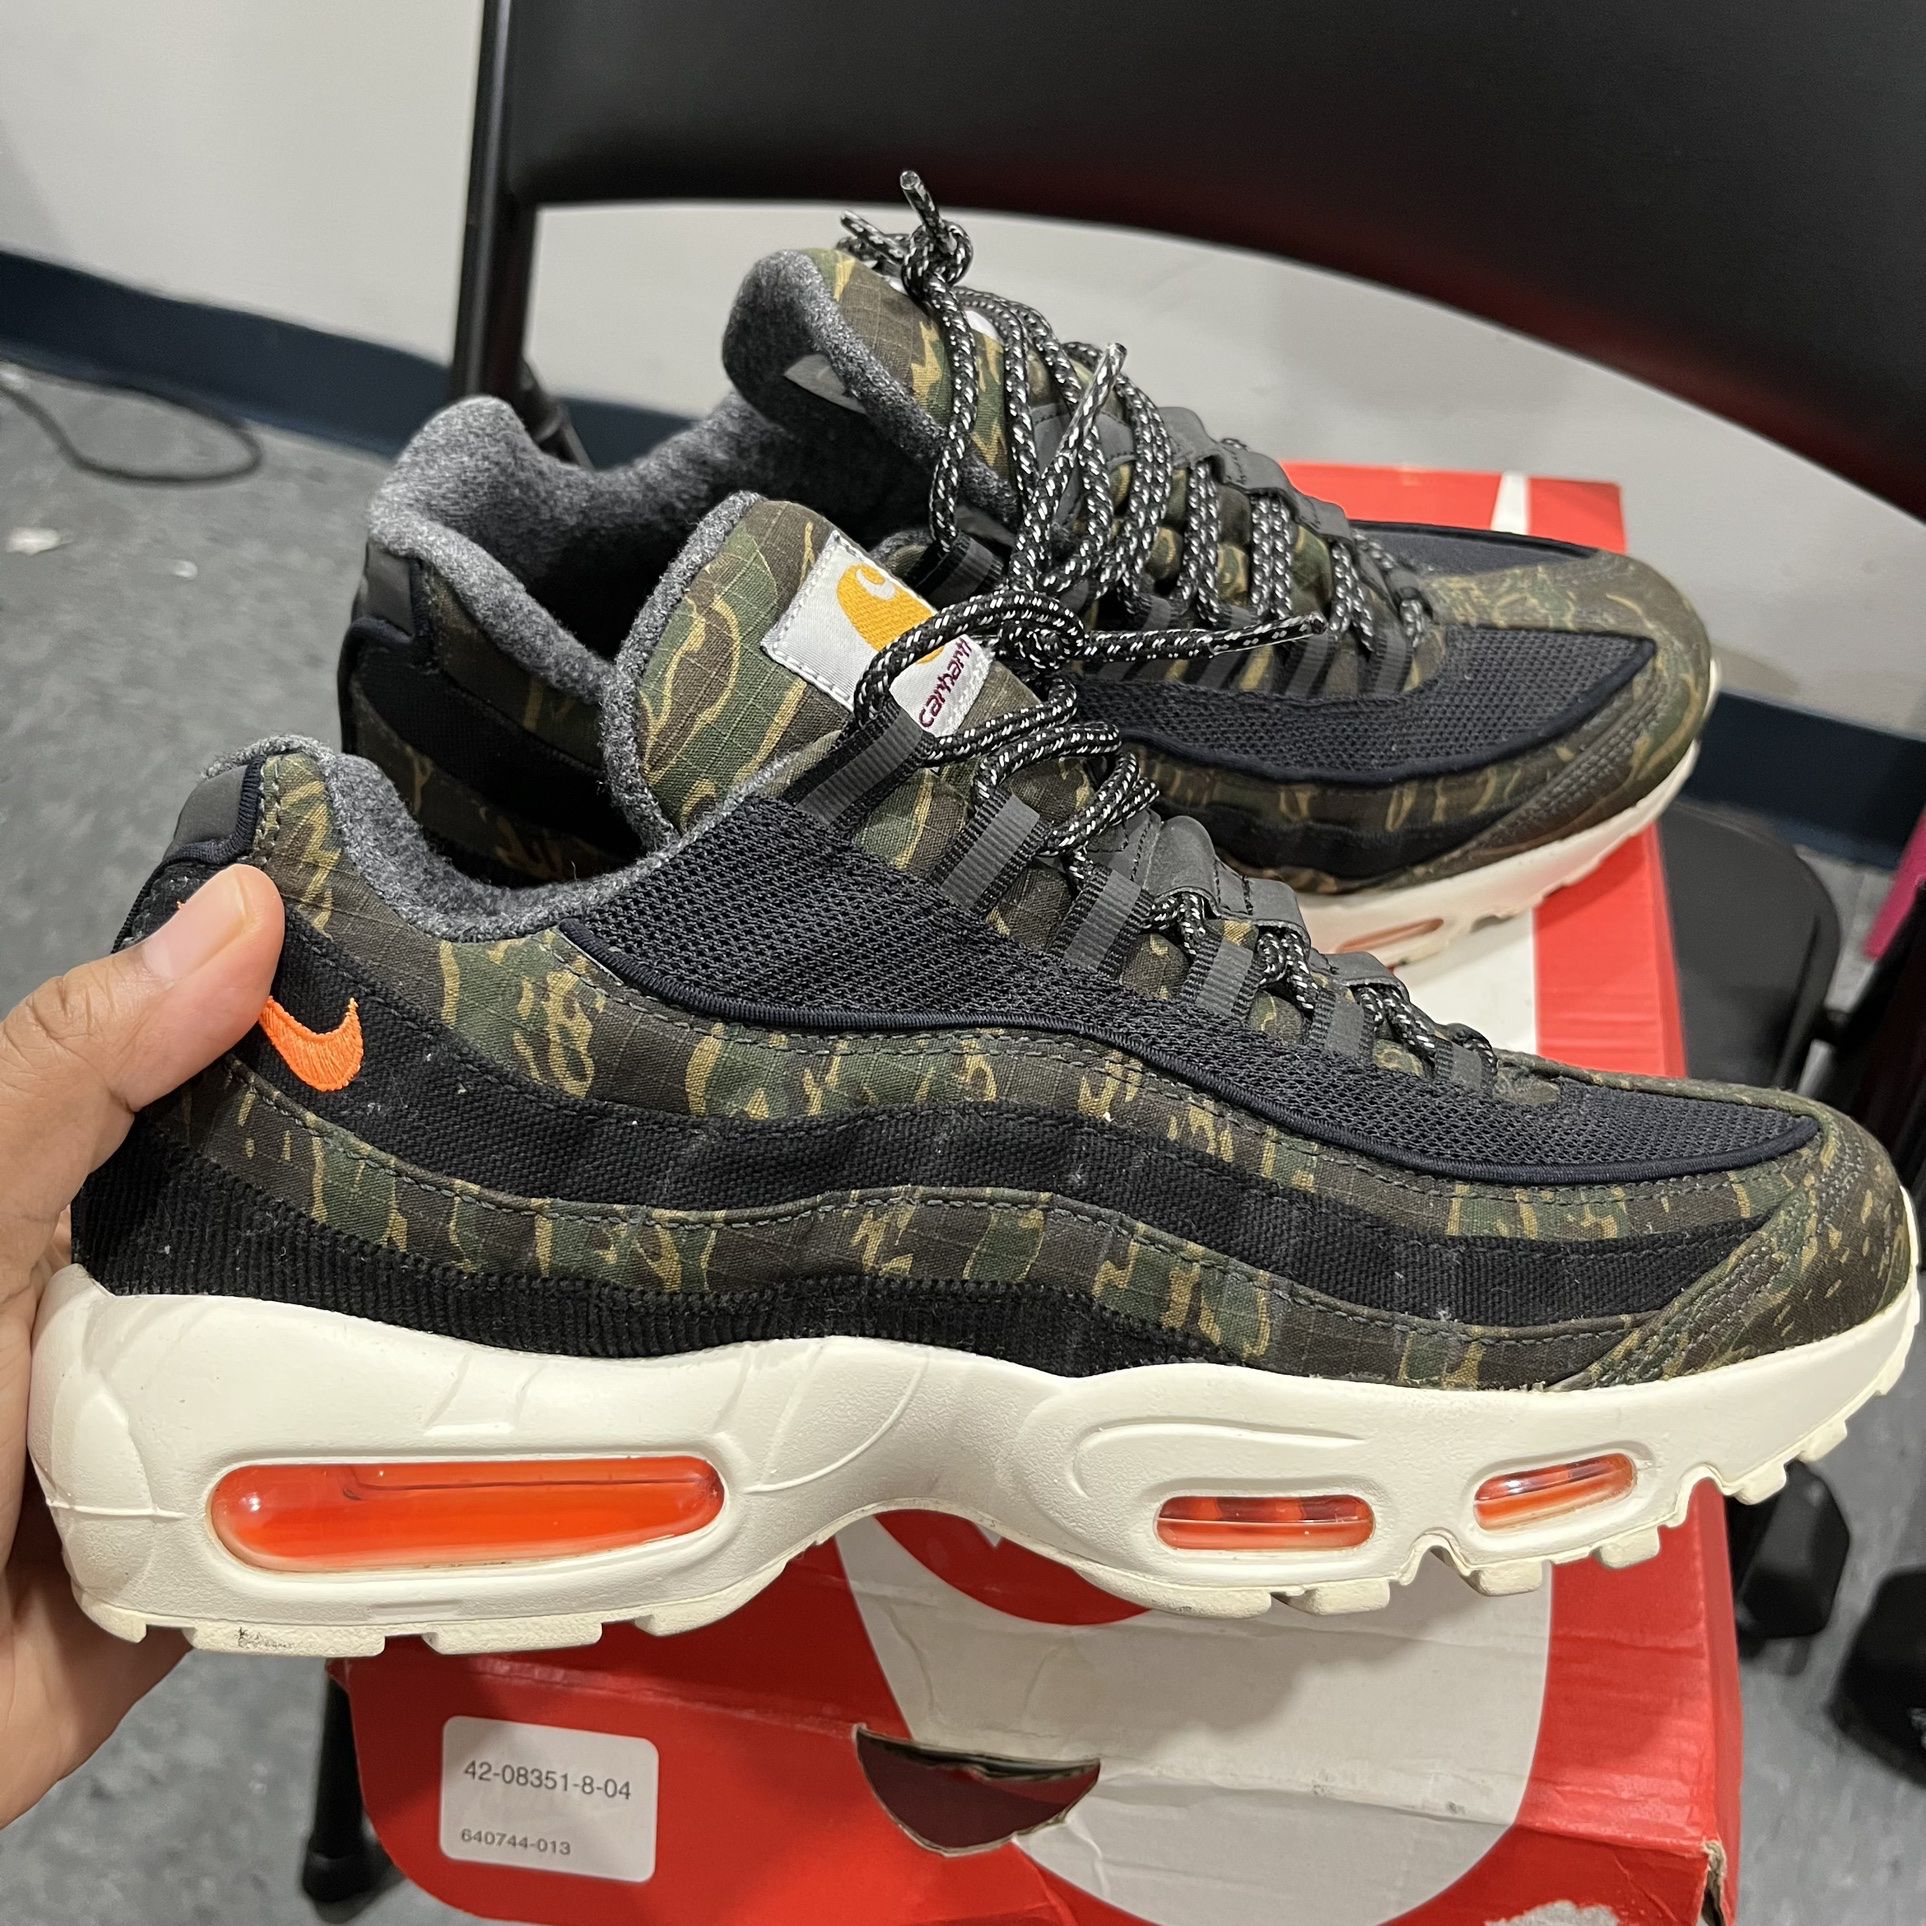 Air Max 95 'Carhartt WIP Sale in Jersey City, NJ - OfferUp